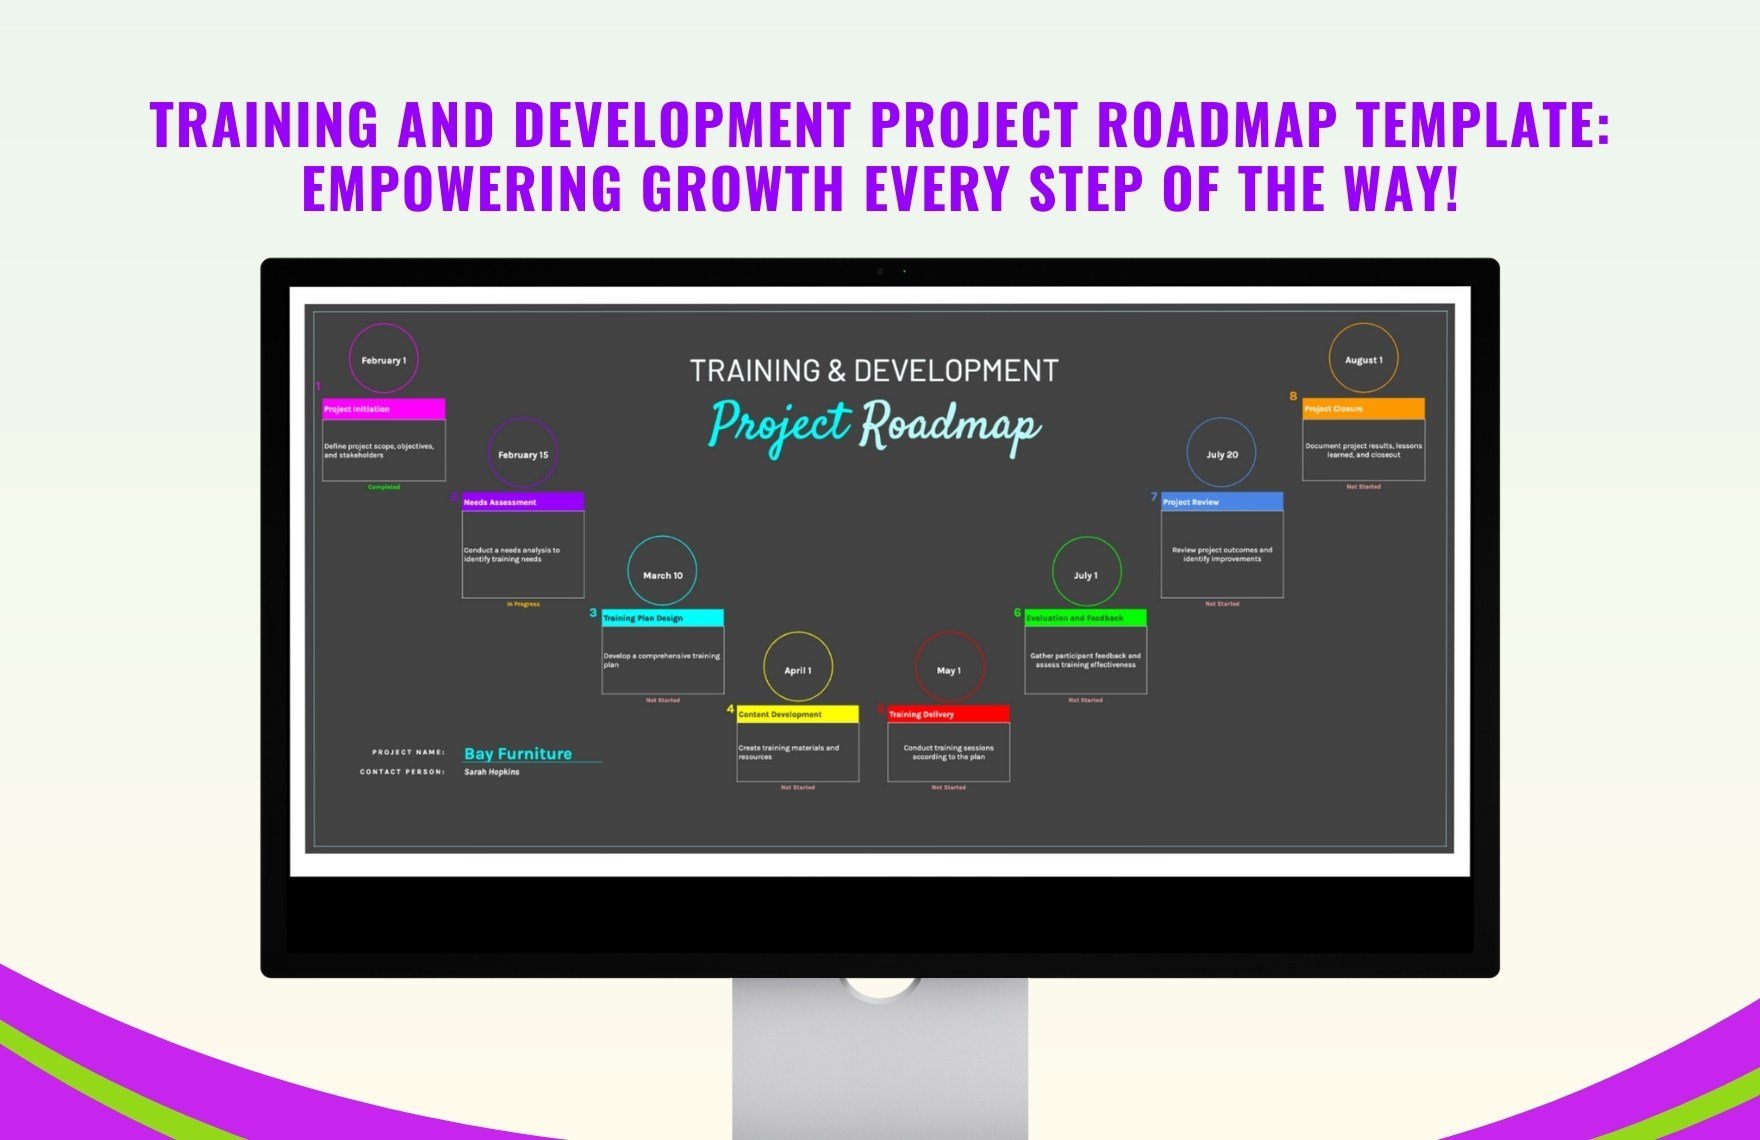 Training and Development Project Roadmap Template